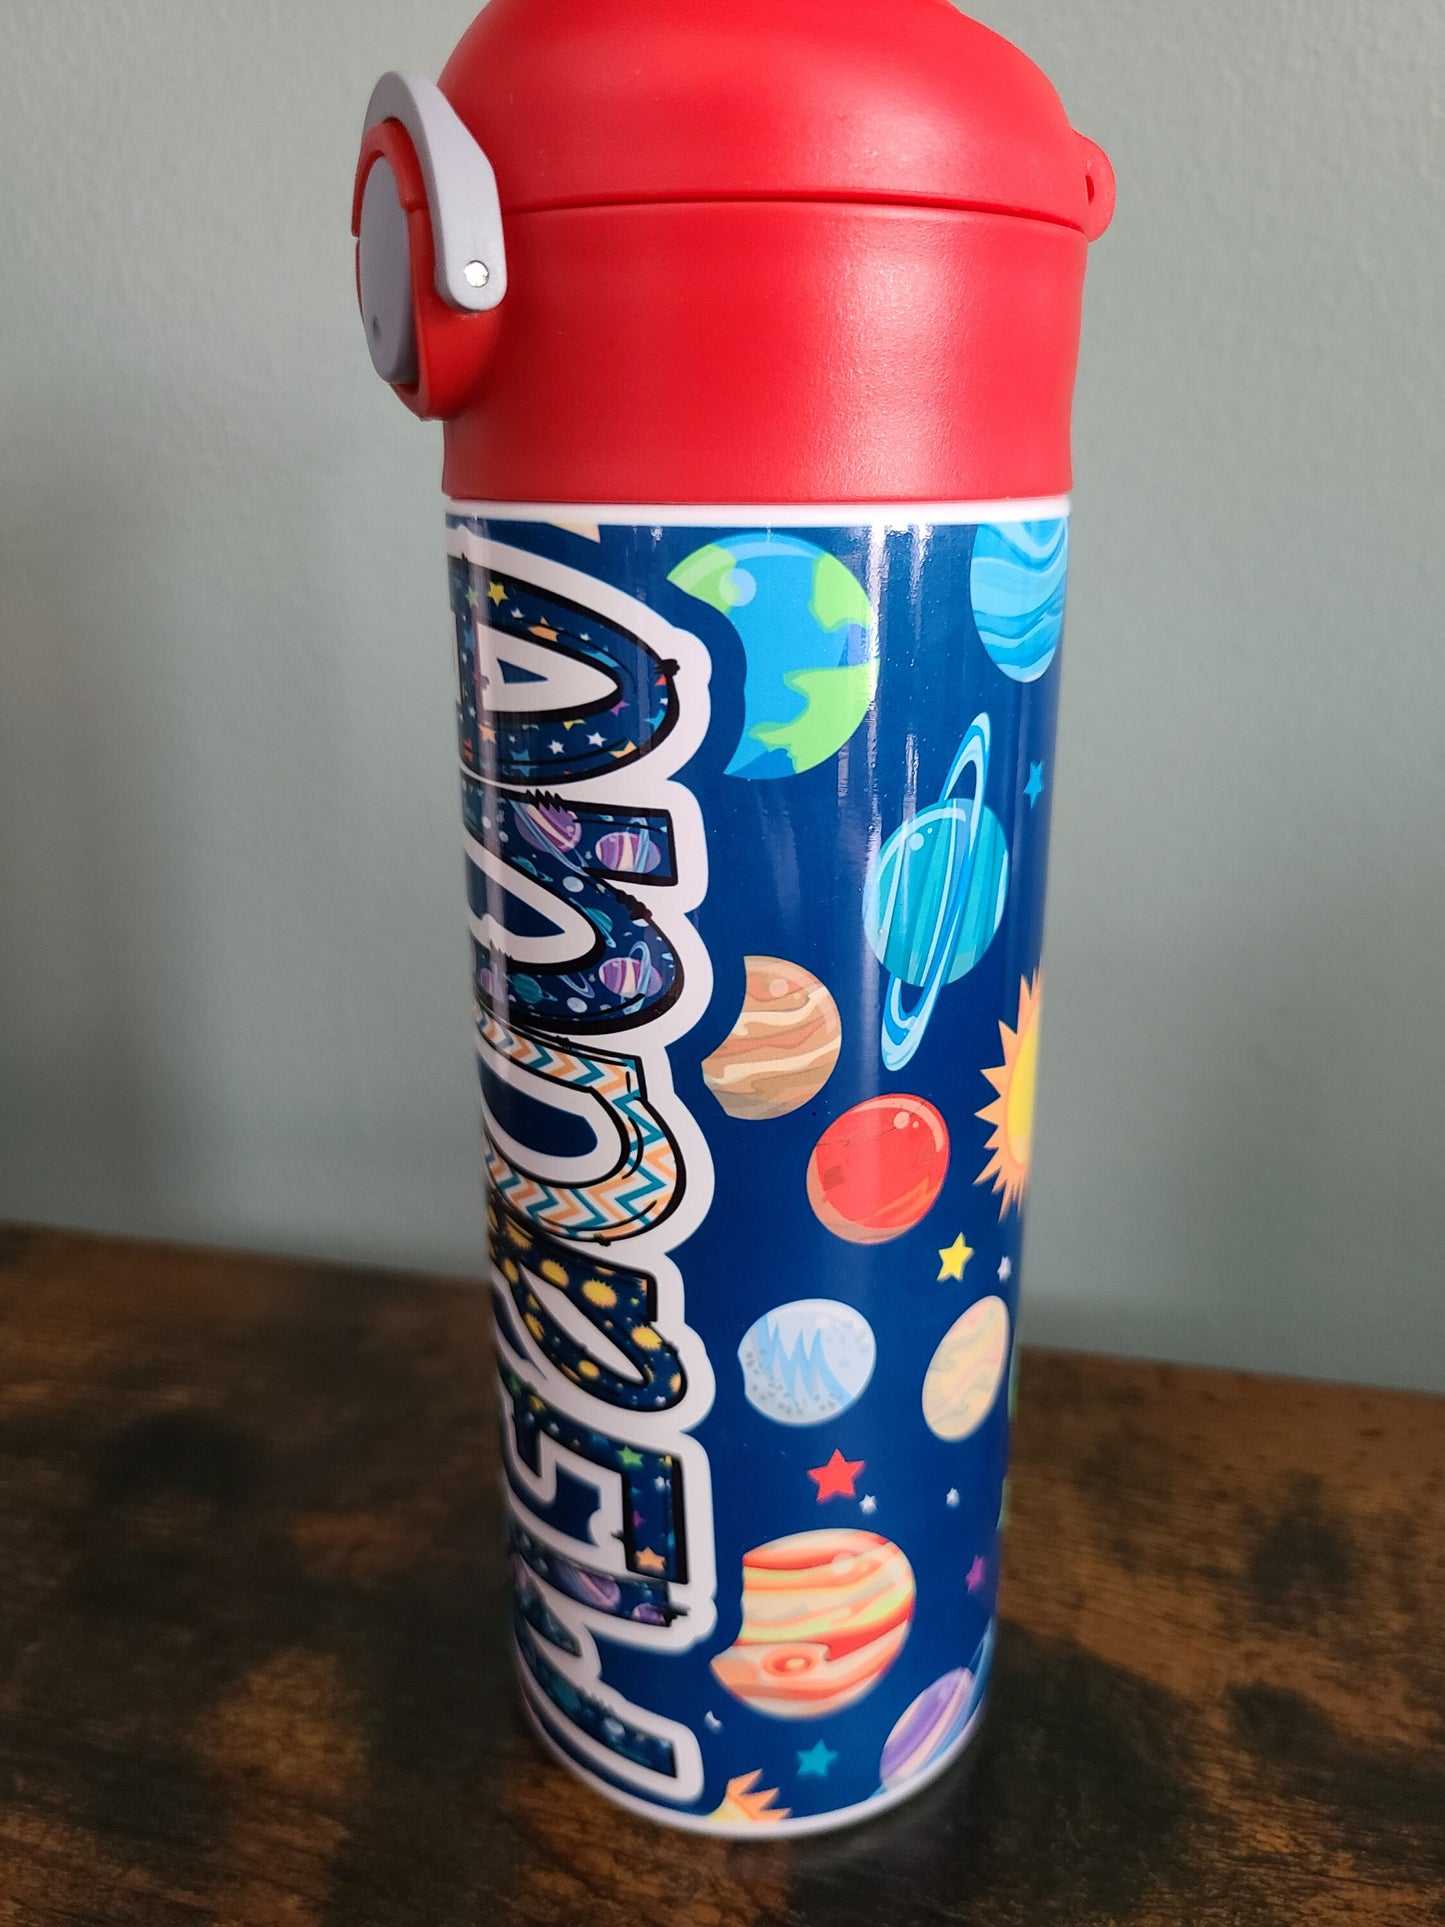 Personalized Space Themed Water Bottle - 12 oz Flip Top Water Bottle with Straw